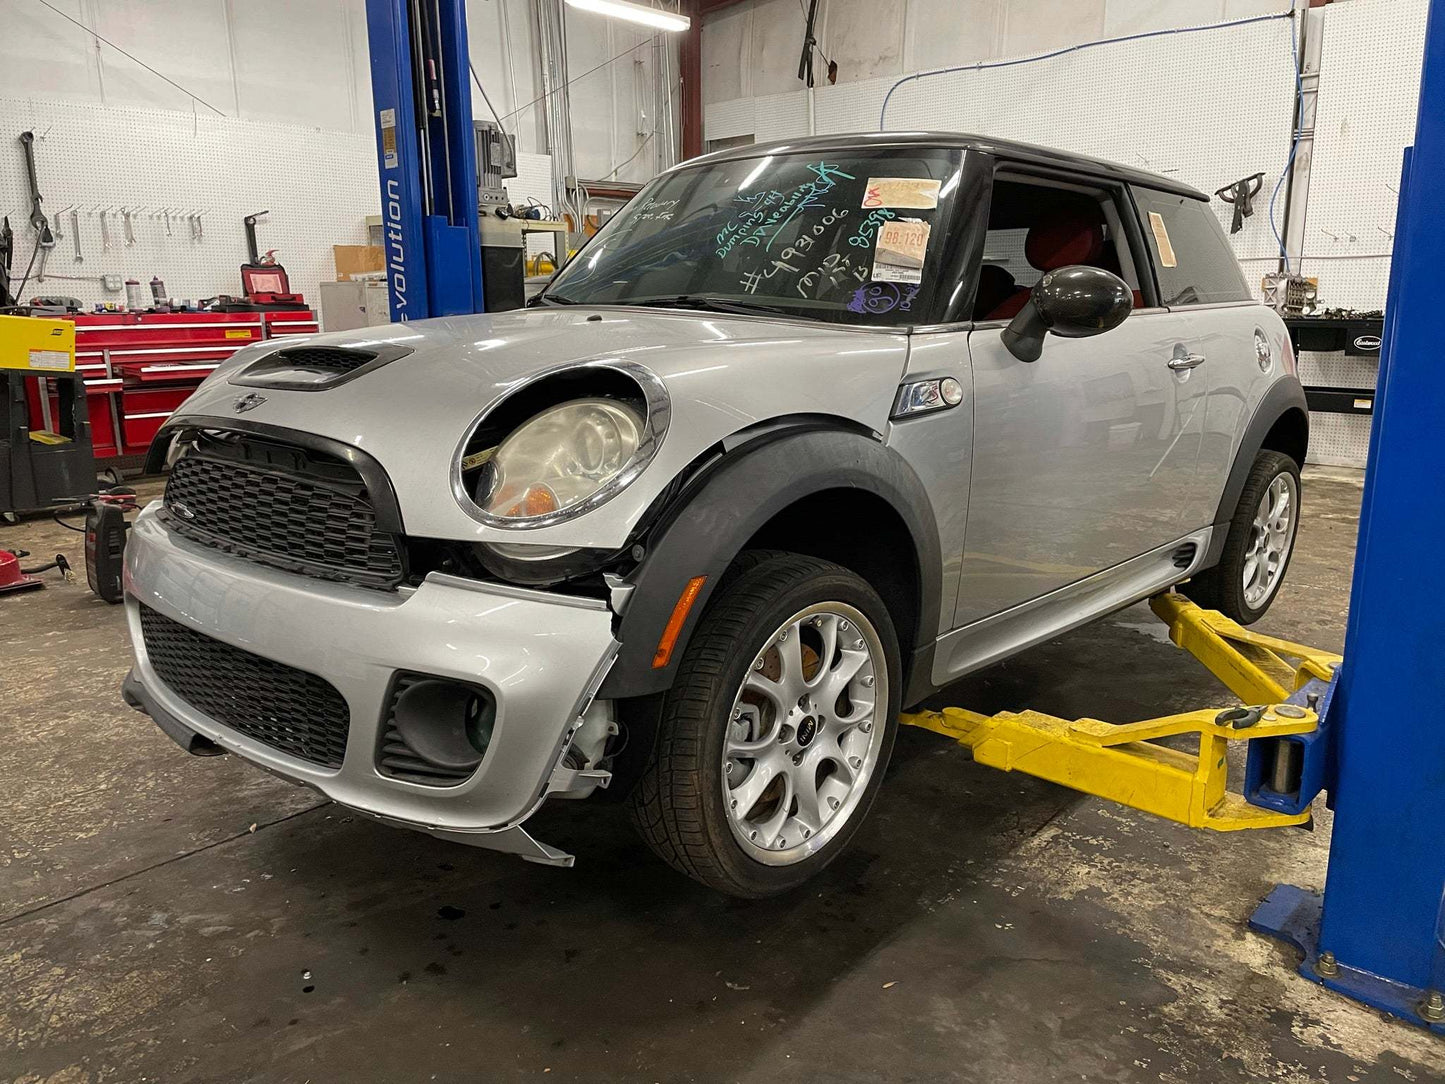 2007 MINI Cooper Hatchback S with JCW Tuning Kit, New Parts Car (March 2021) Stk # 227